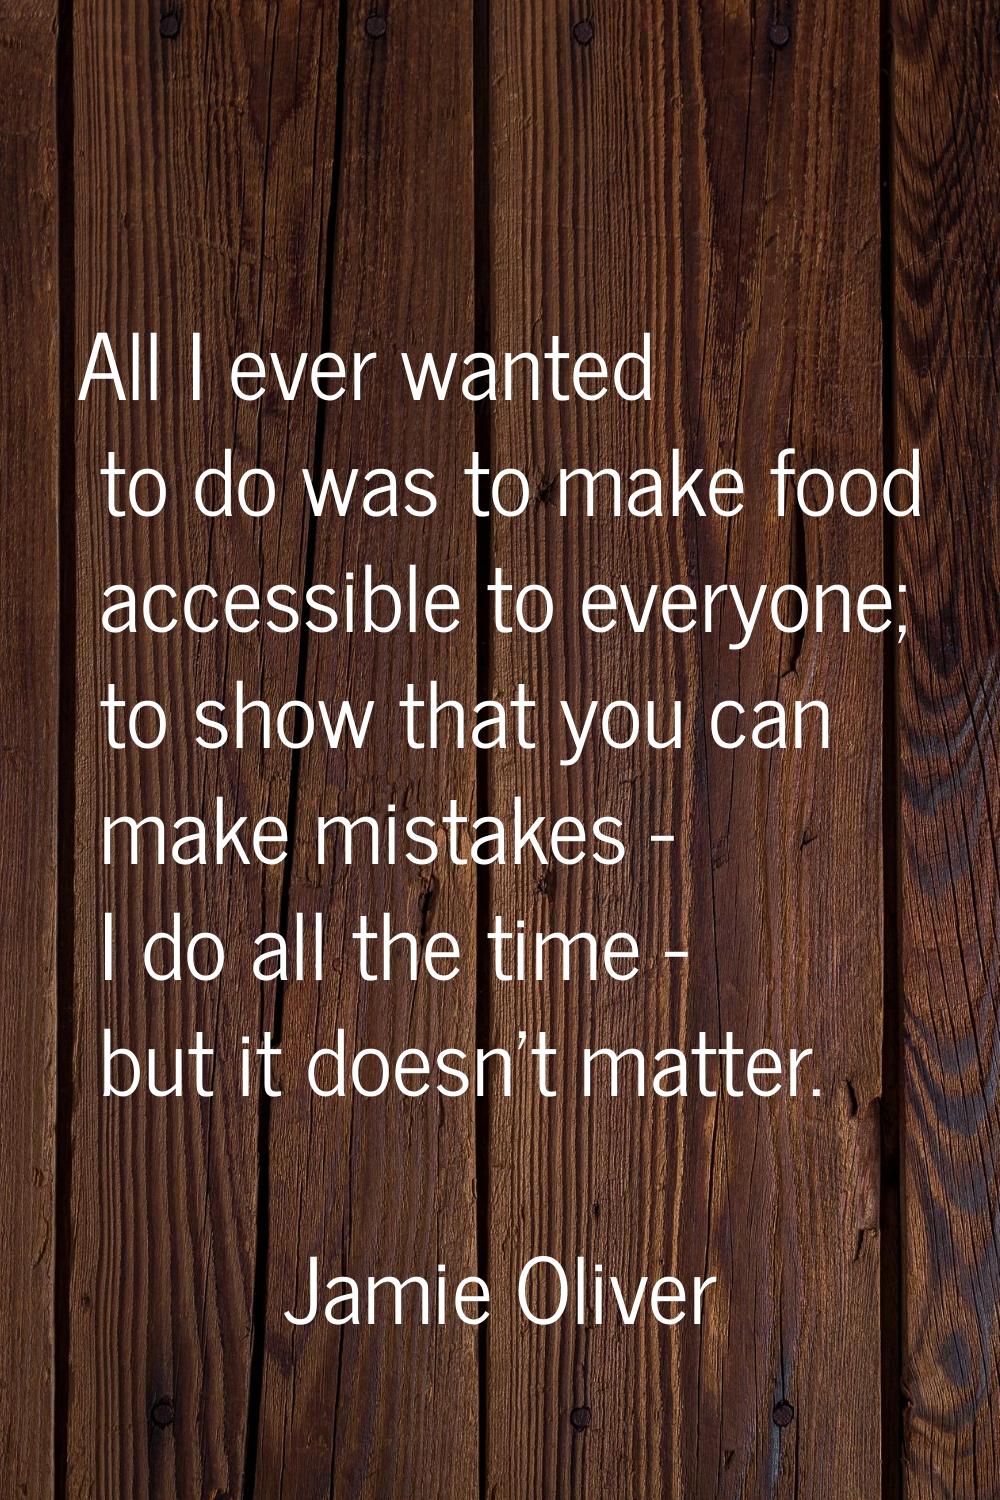 All I ever wanted to do was to make food accessible to everyone; to show that you can make mistakes